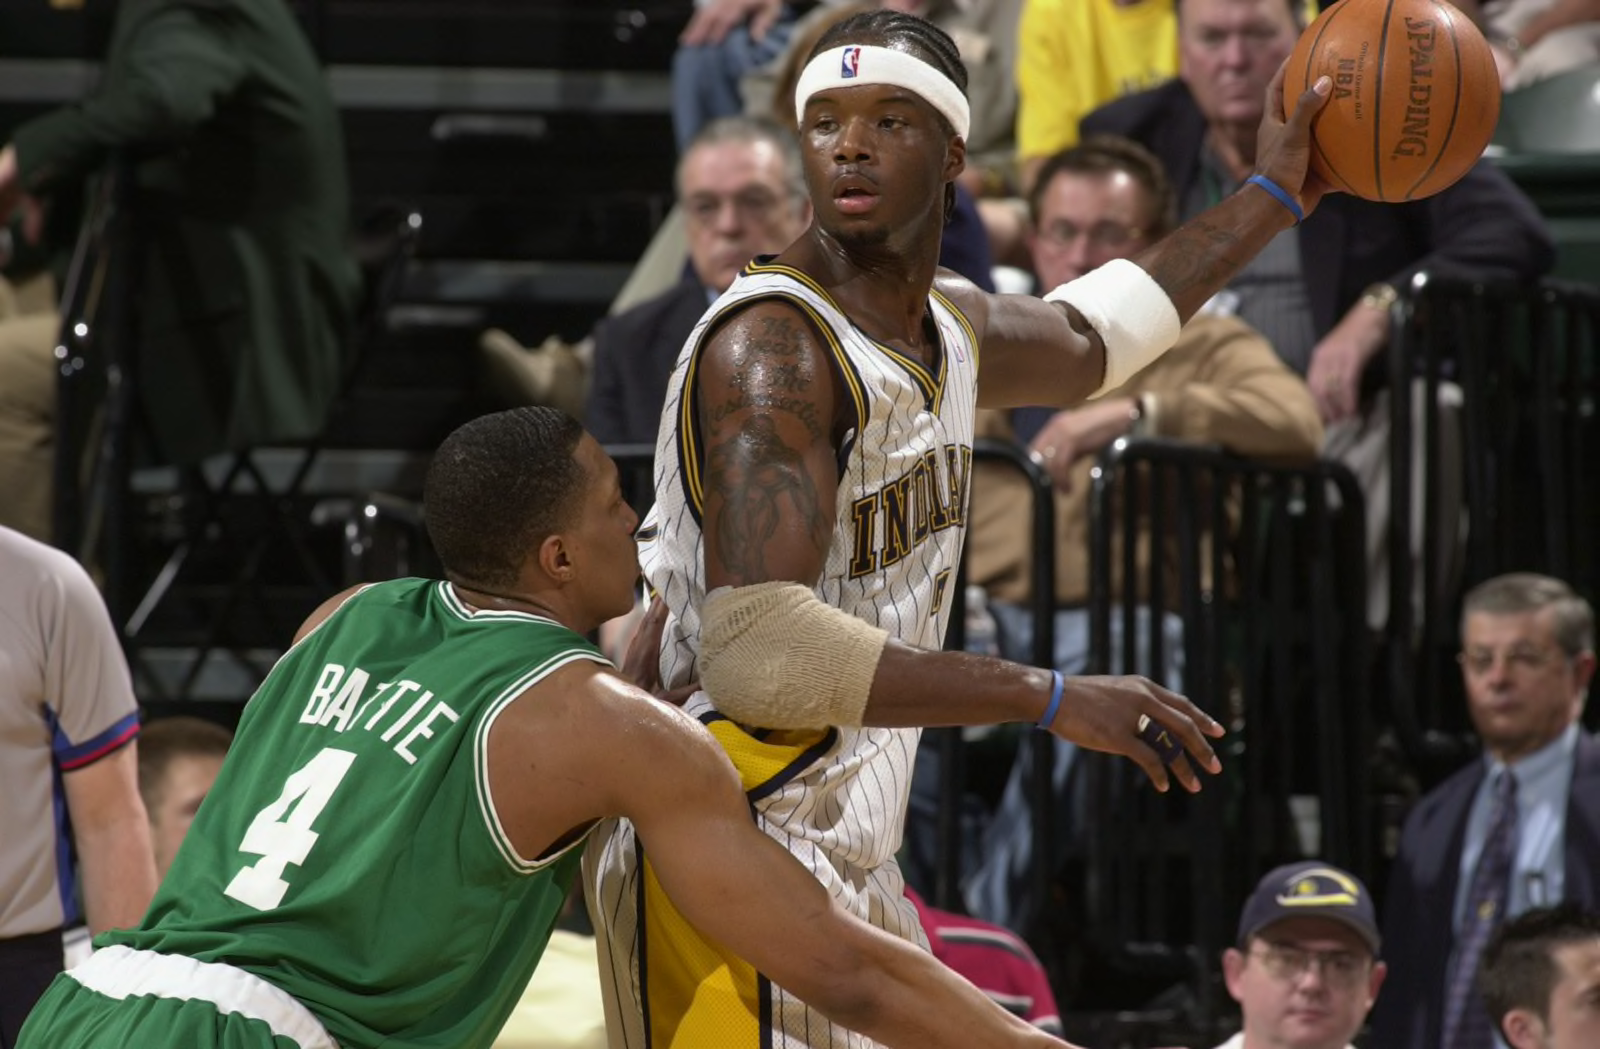 Jermaine O'Neal rewriting the end to his career - The Boston Globe